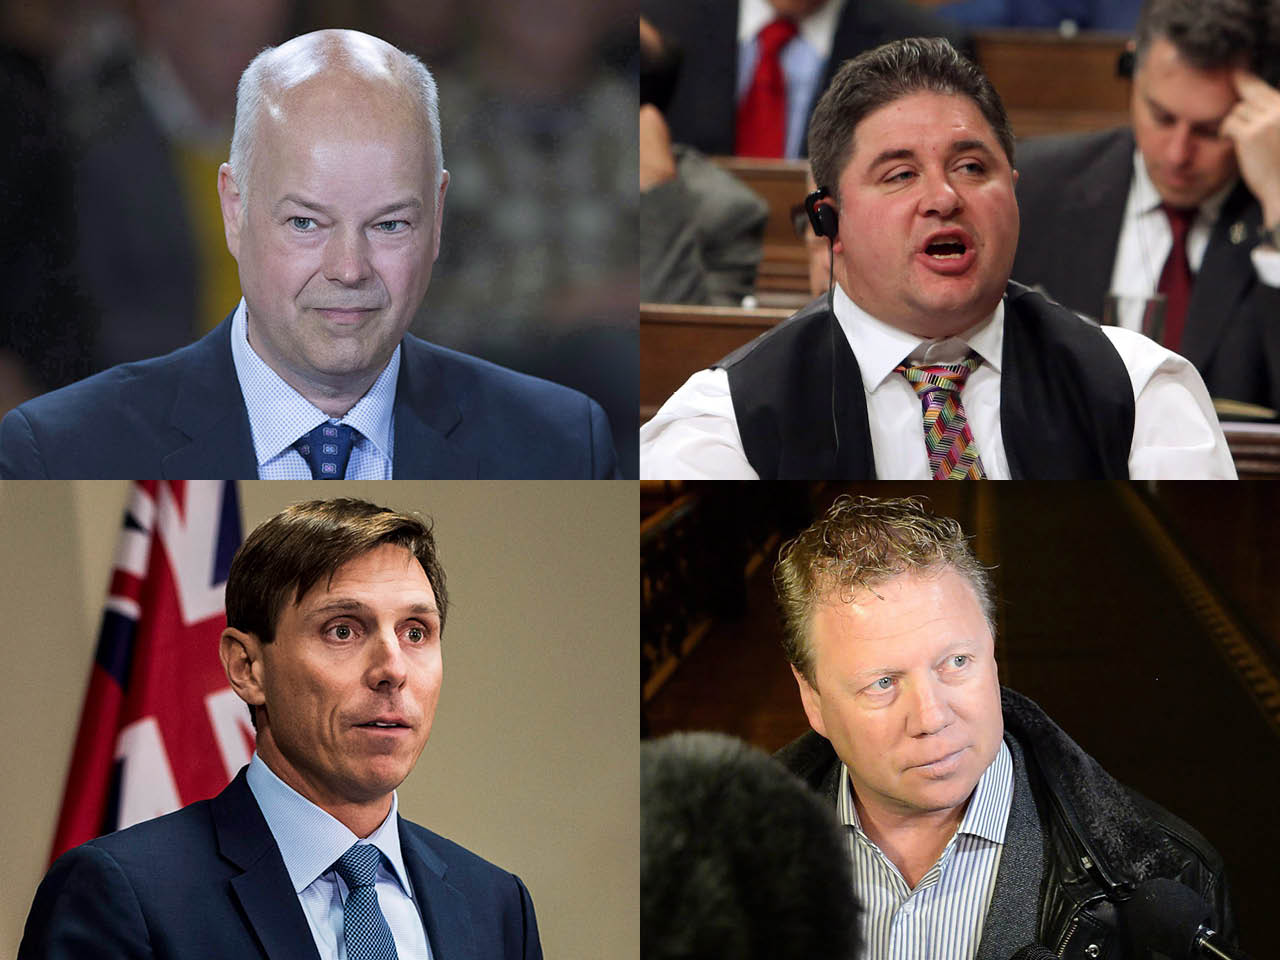 Vetting political candidates: Jamie Baillie, Kent Hehr, Rick Dykstra and Patrick Brown have all stepped down after alleged sexual misconduct